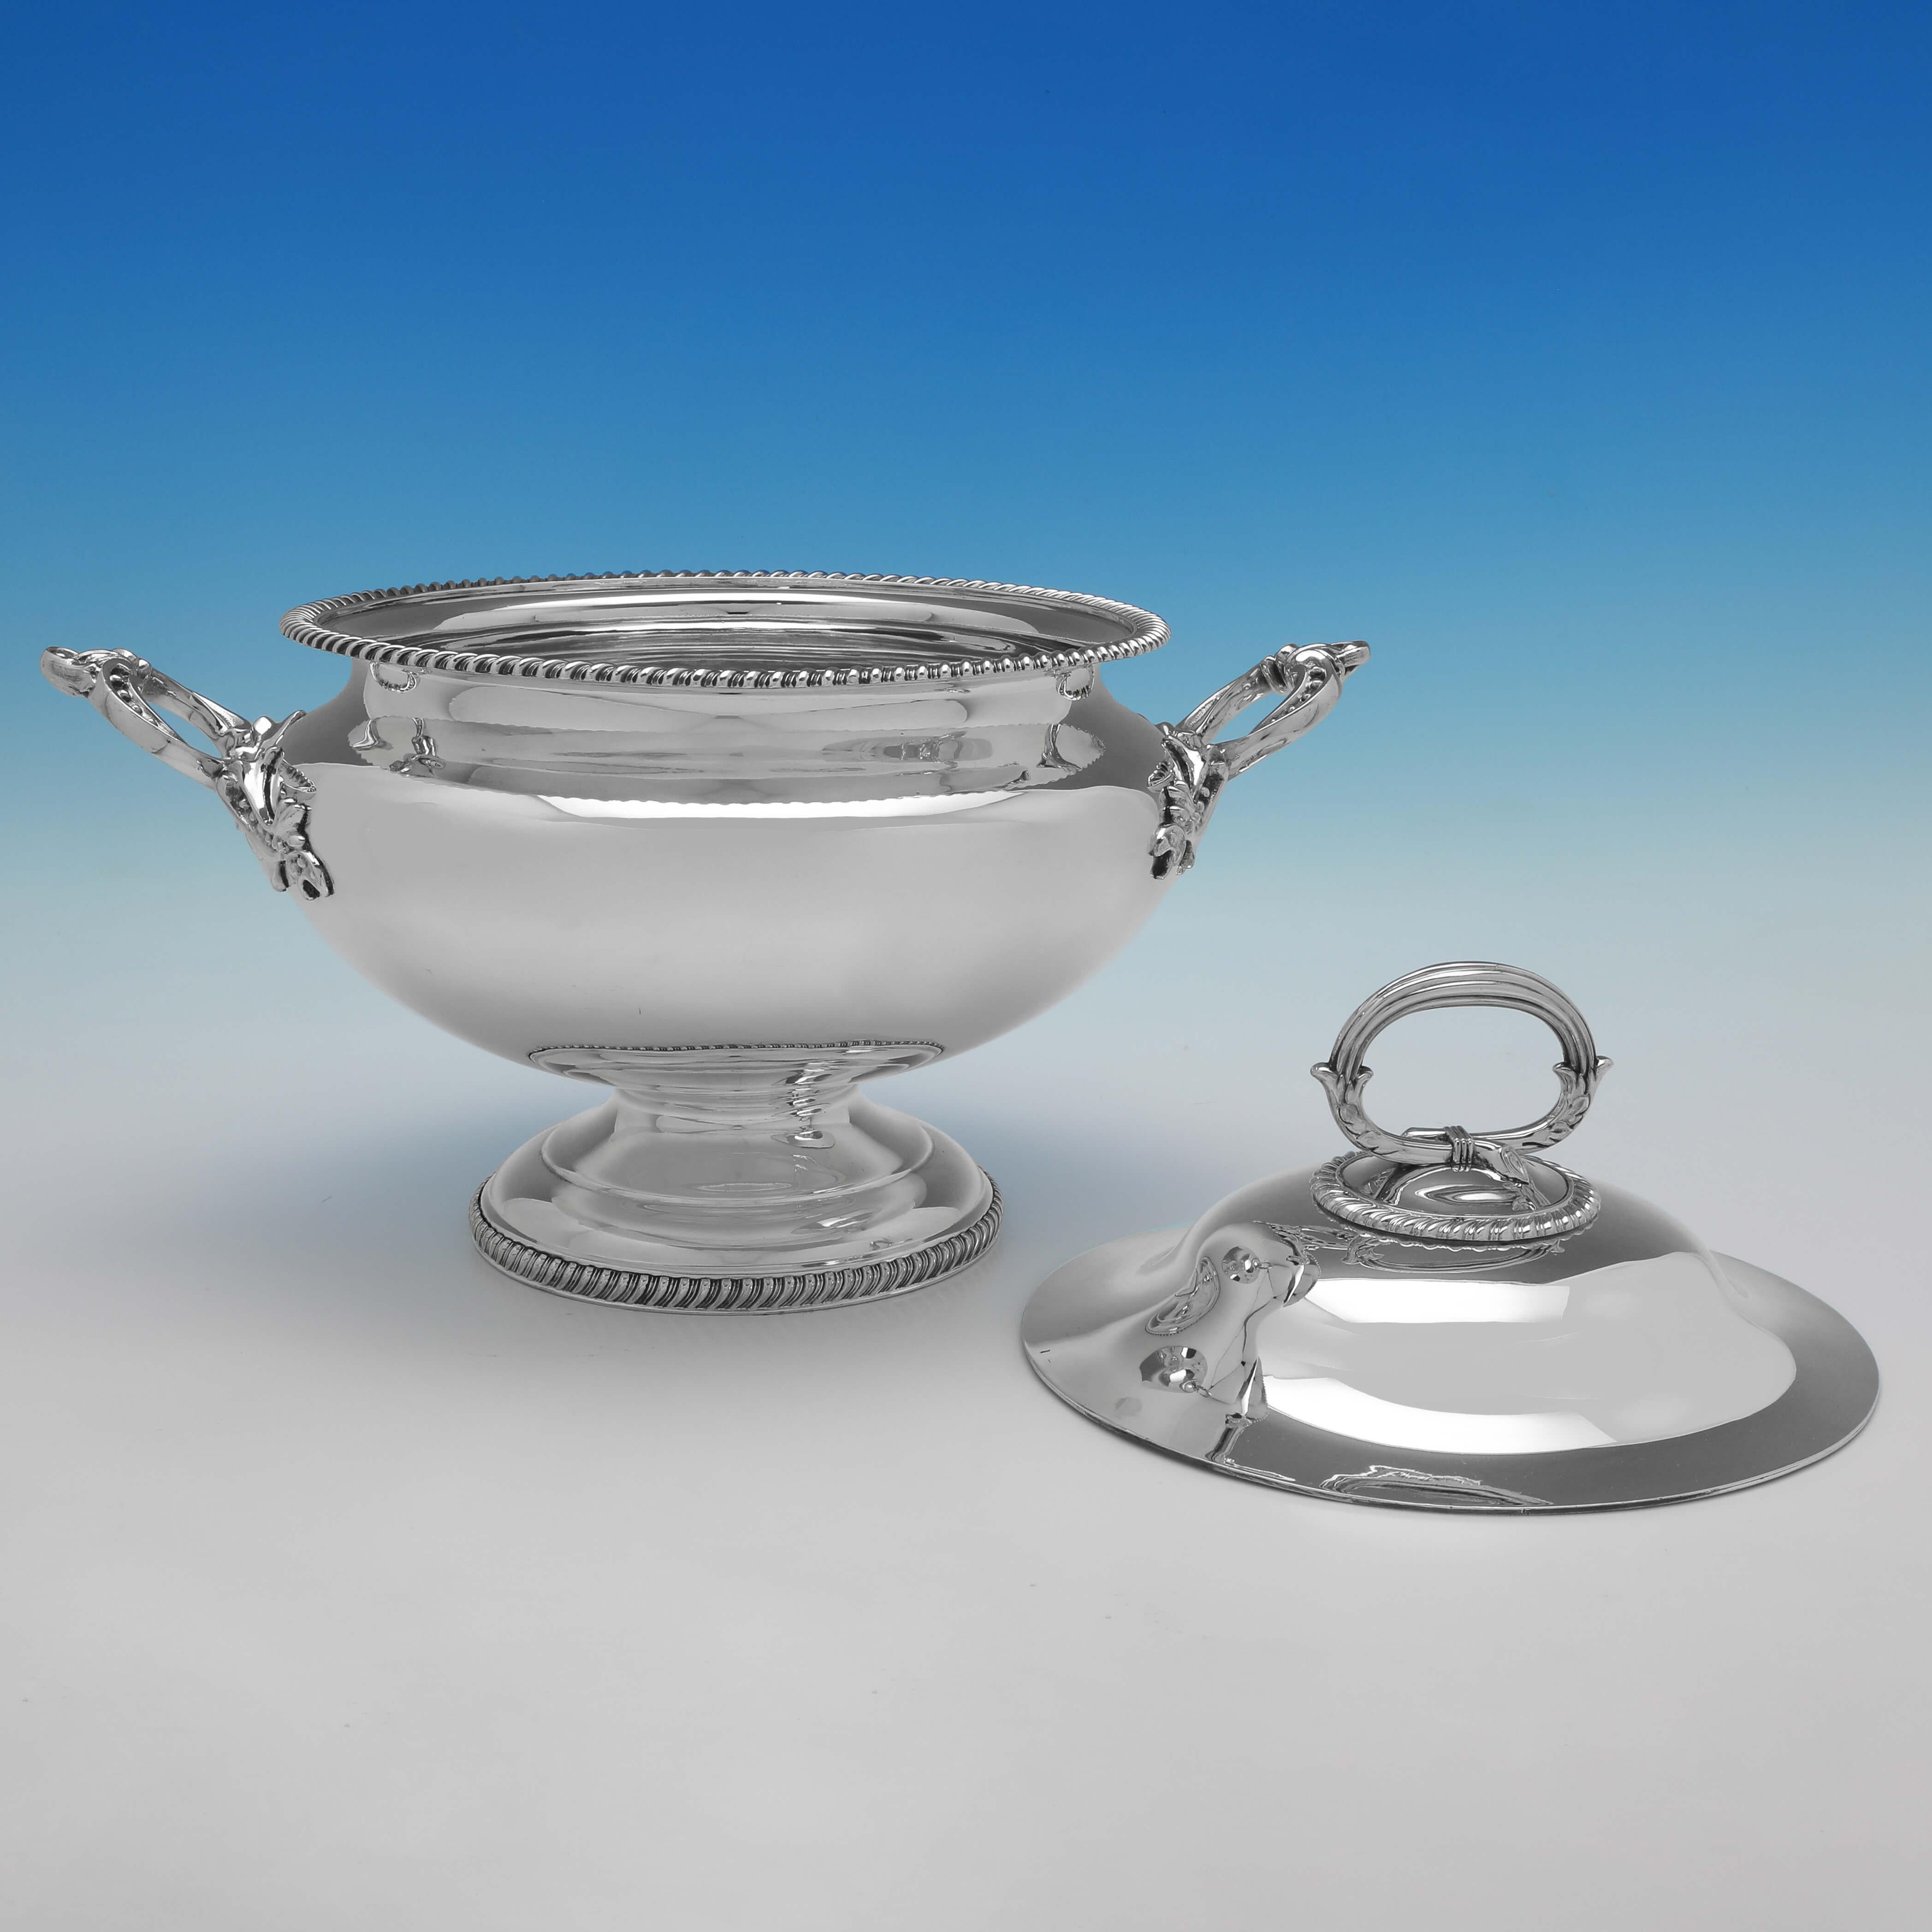 English Victorian Silver Plated Tureen on Warming Stand - Made circa 1880 For Sale